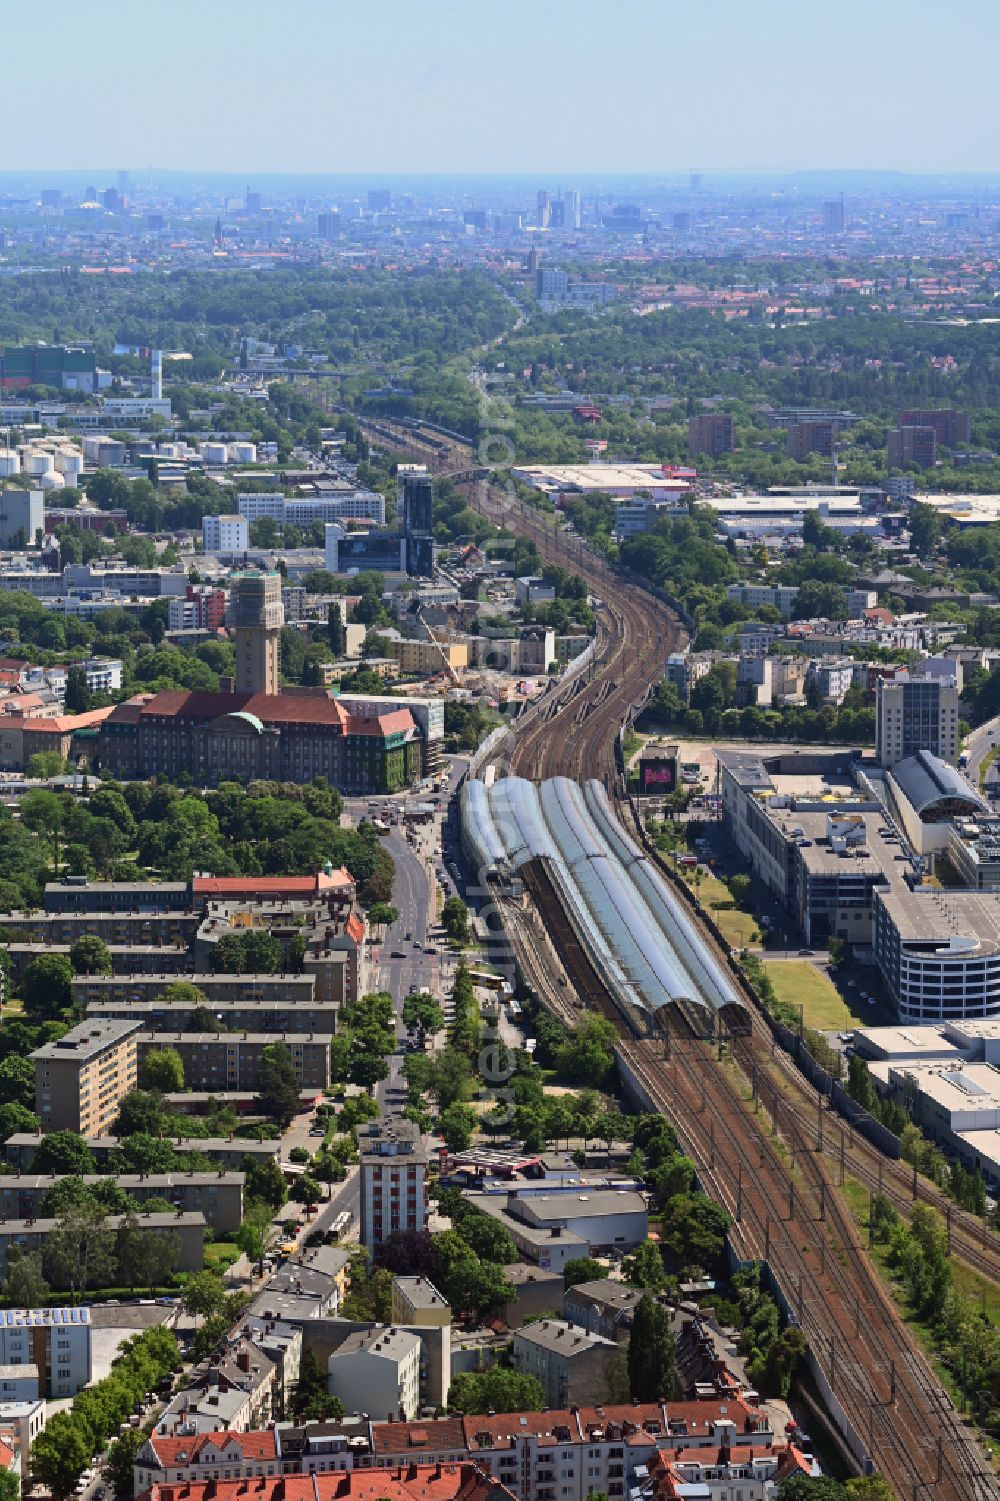 Aerial photograph Berlin - Tracks of the Spandau S-Bahn station and the Spandau Arcaden shopping centre on Klosterstrasse in the Spandau district of Berlin, Germany